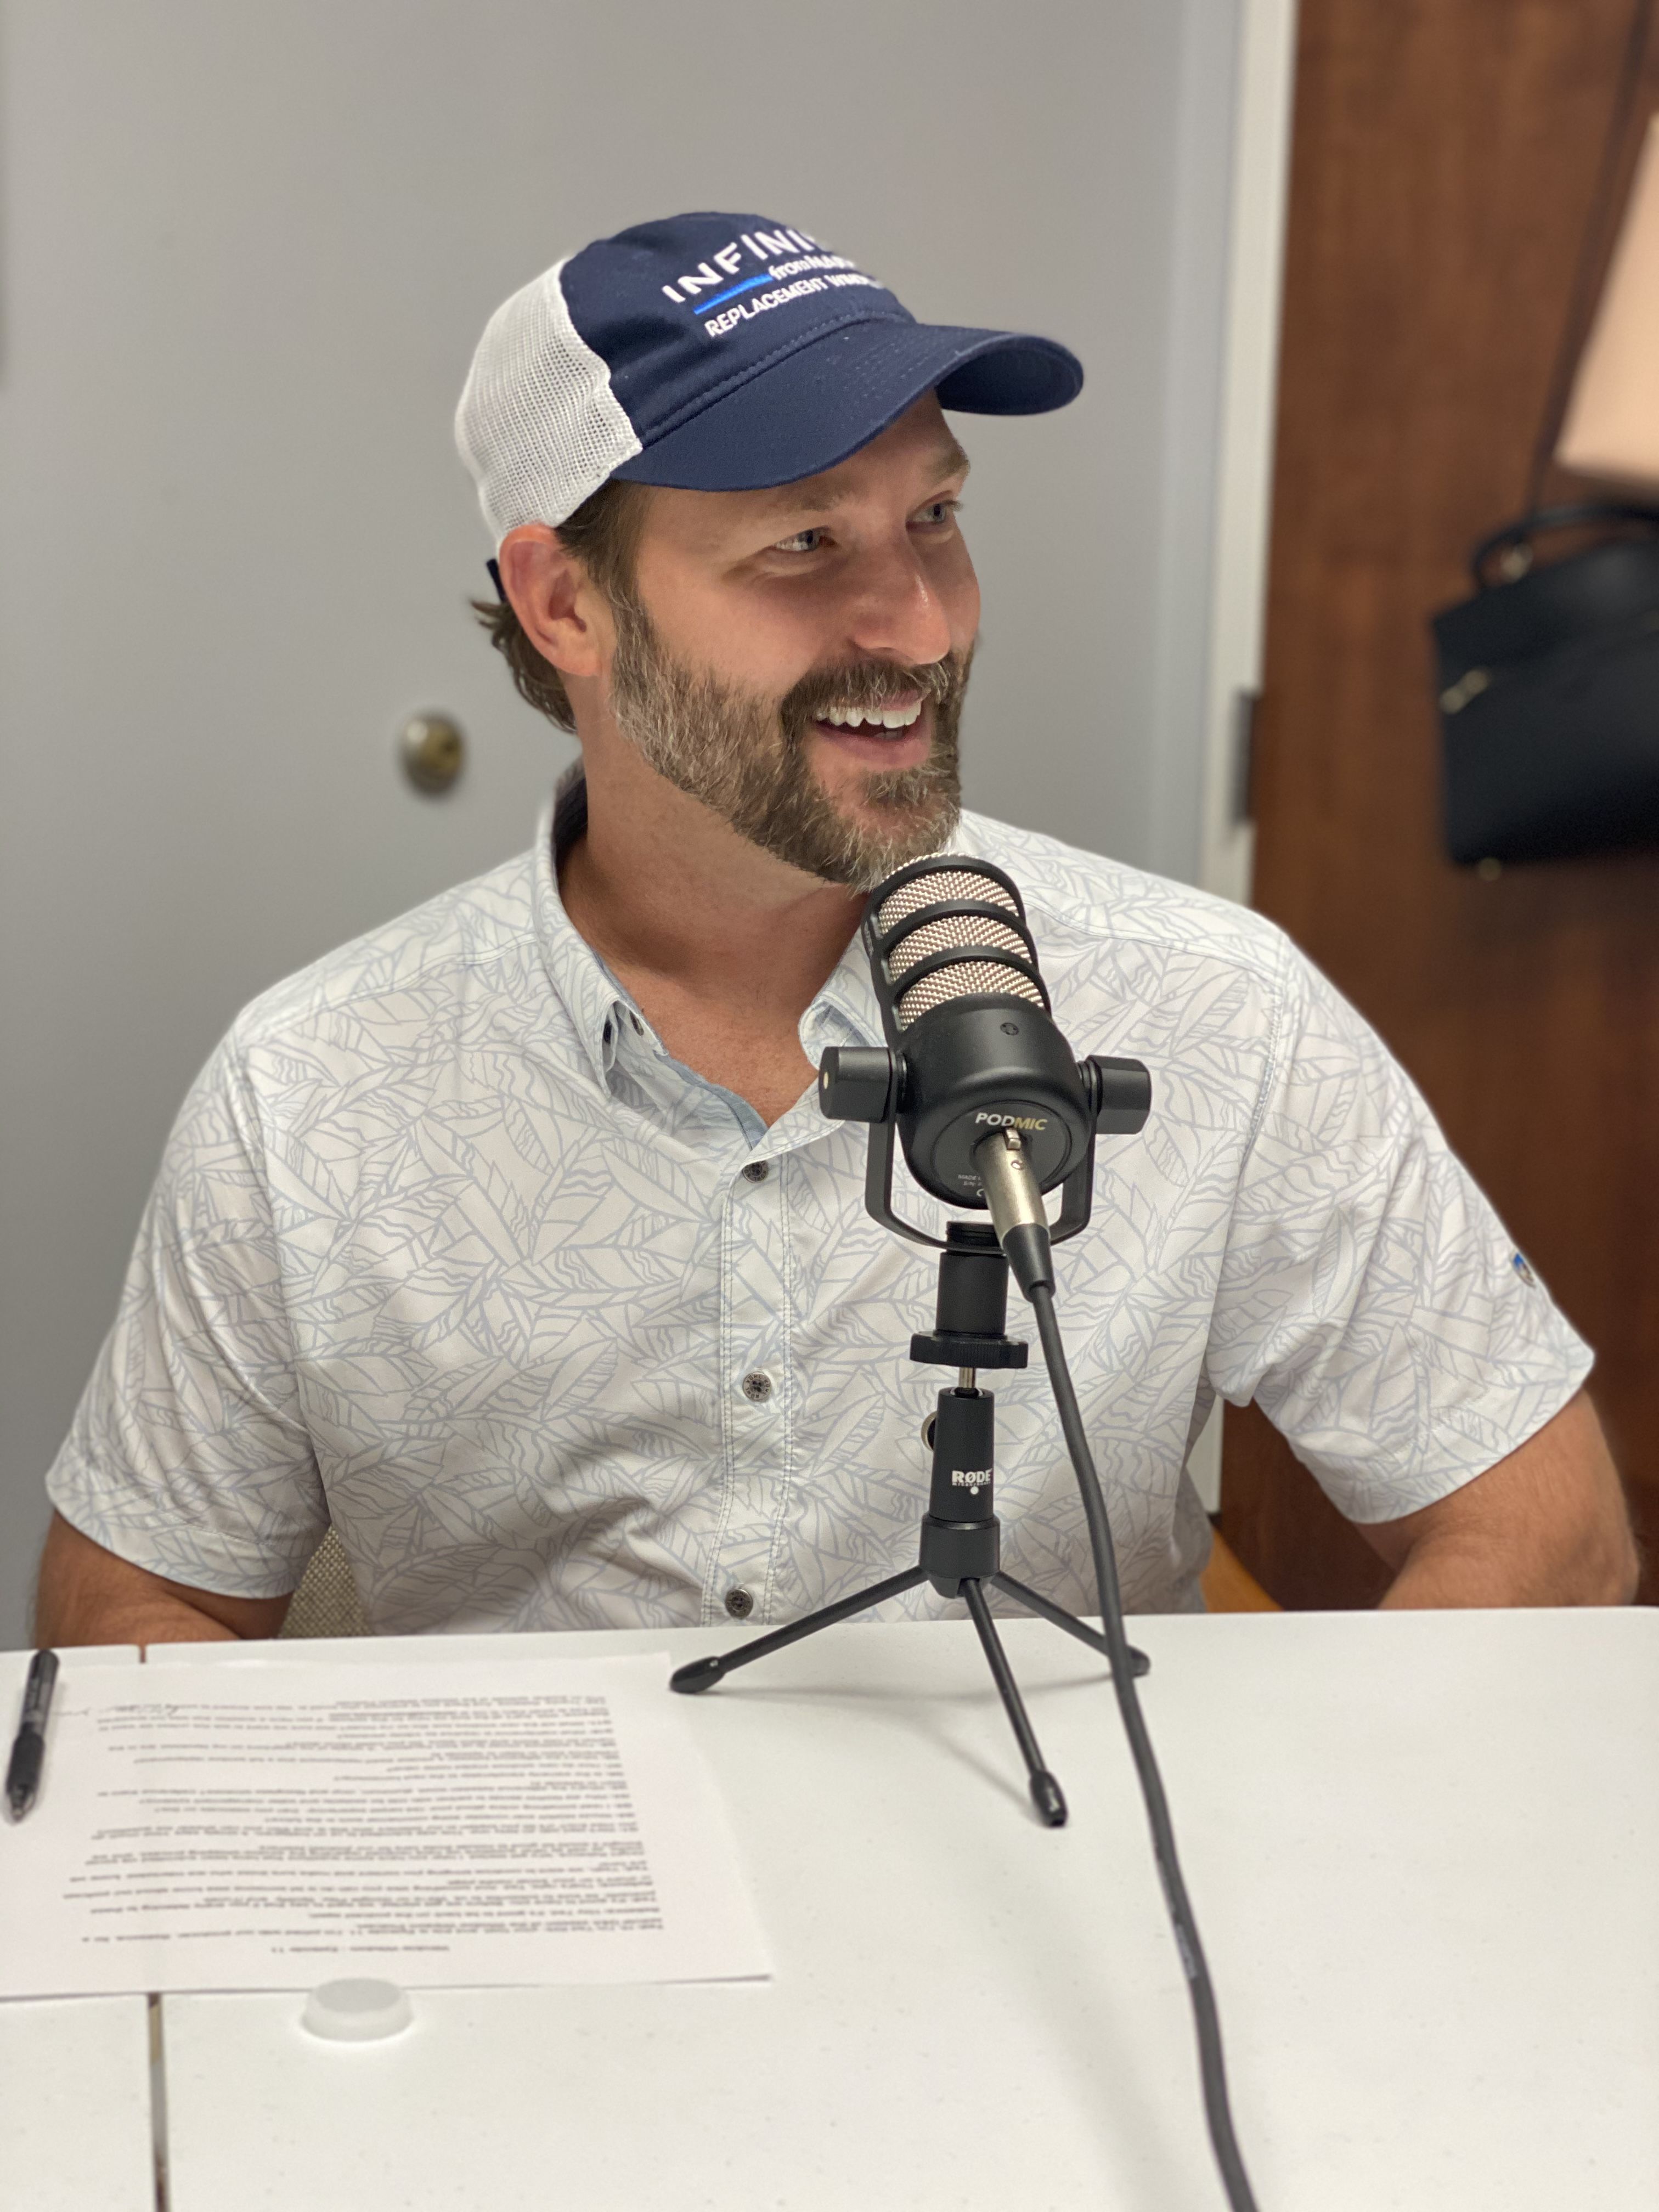 Candid shot during recording for our Window Wisdom podcast